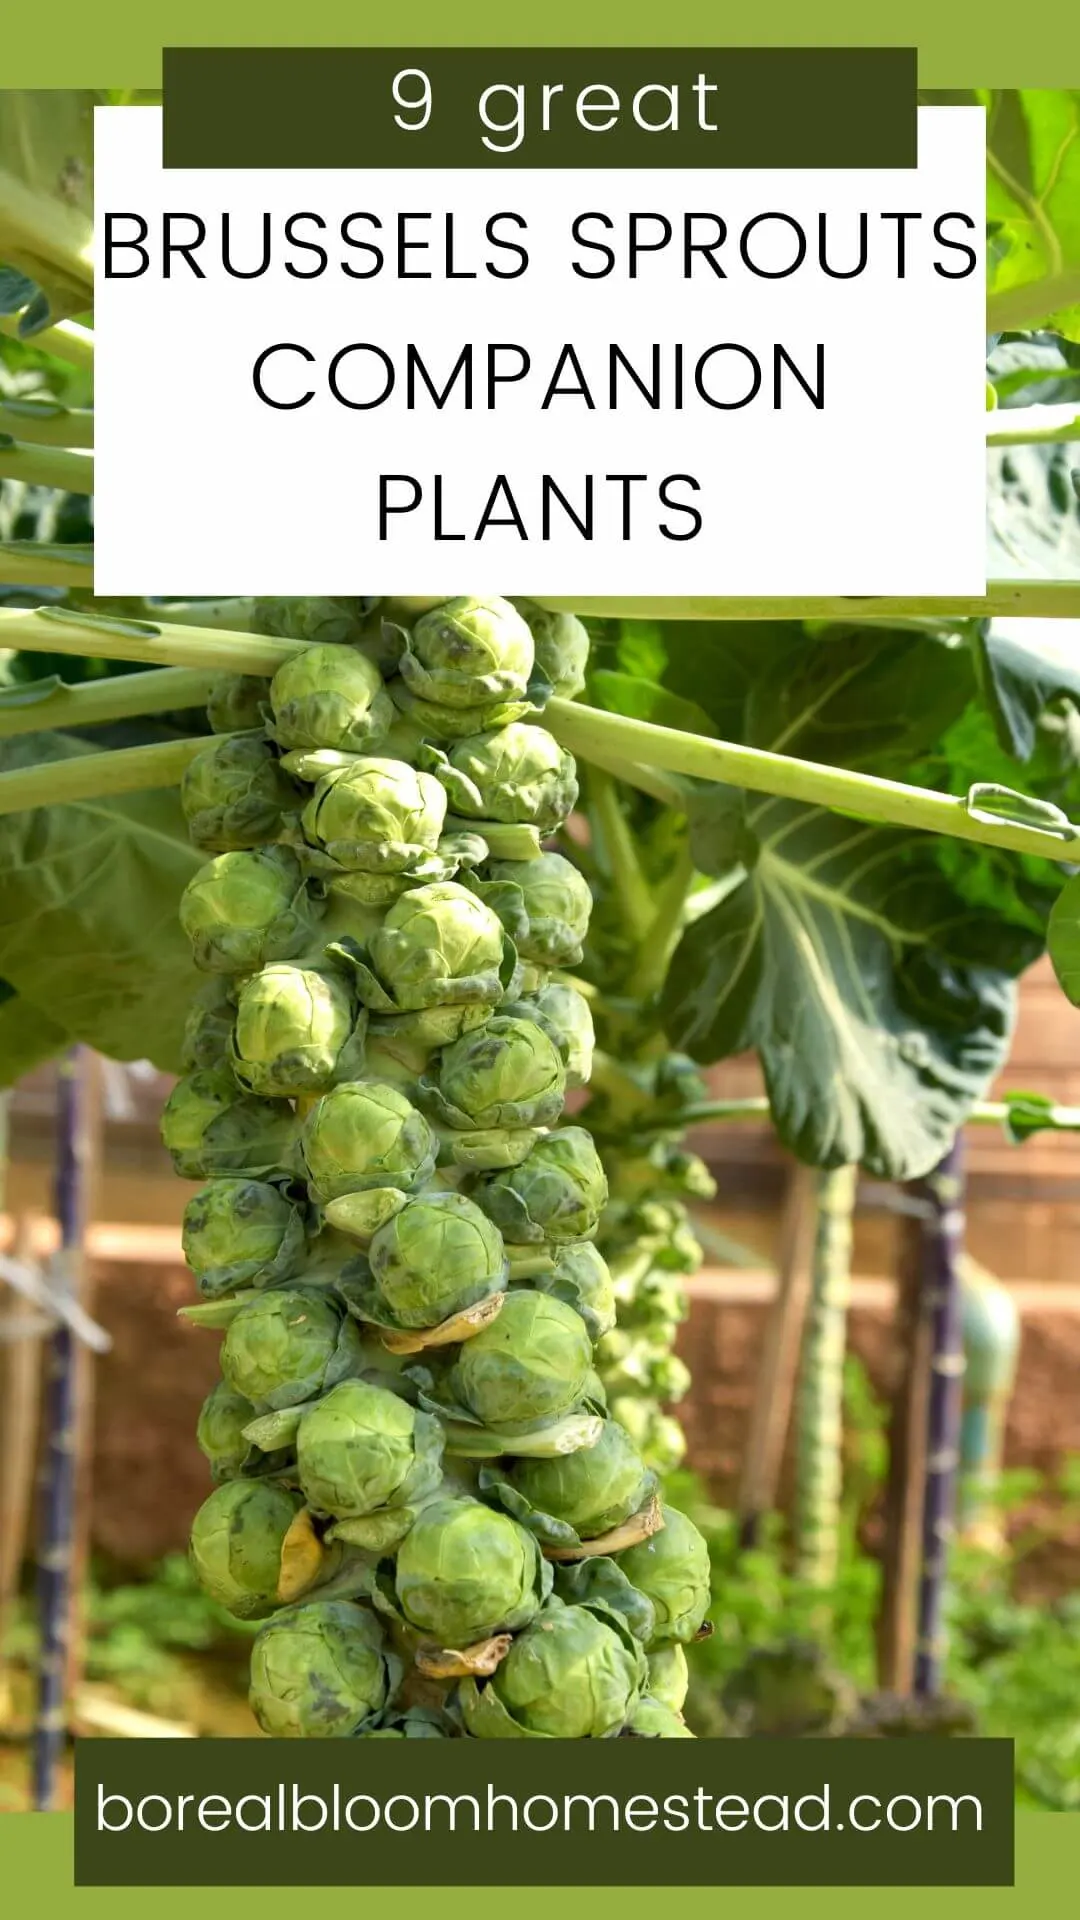 Brussels sprout plant with text overlay: 9 great brussels sprouts companion plants. 